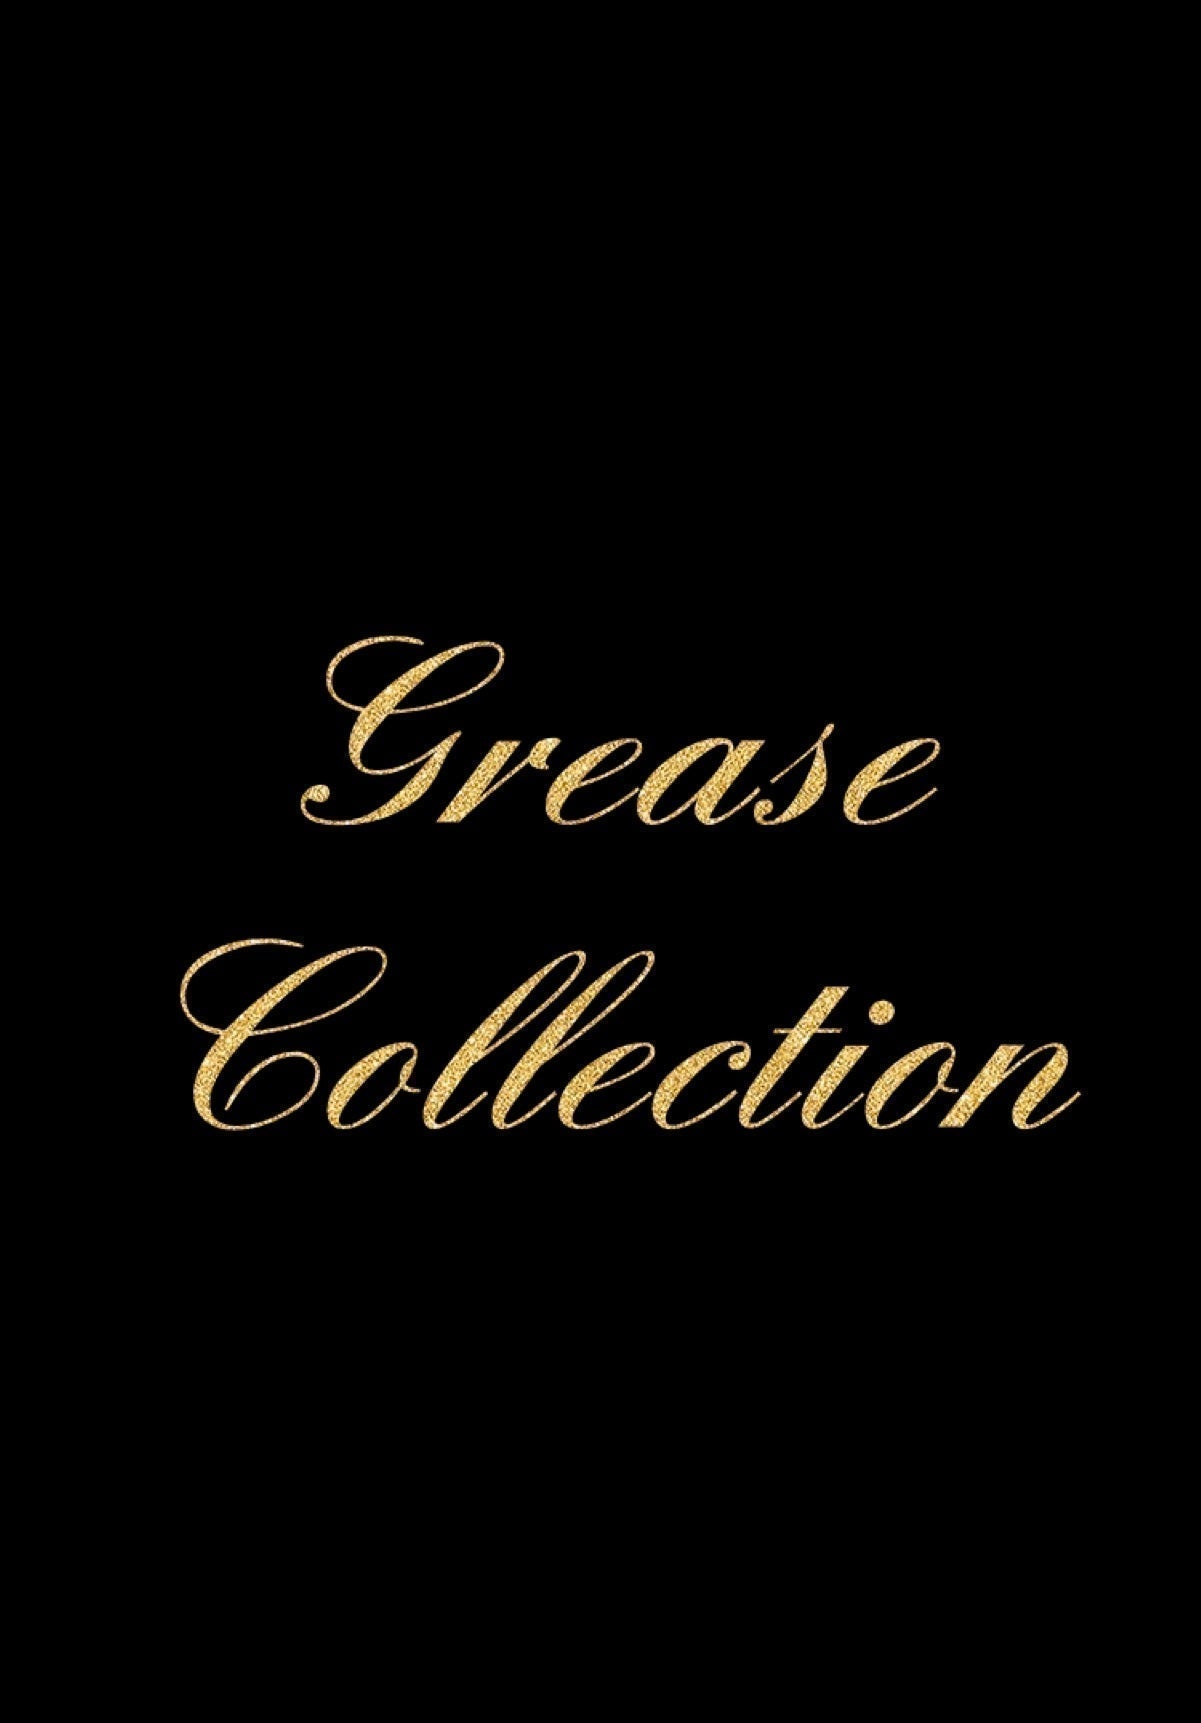 Sonny - Grease Collection